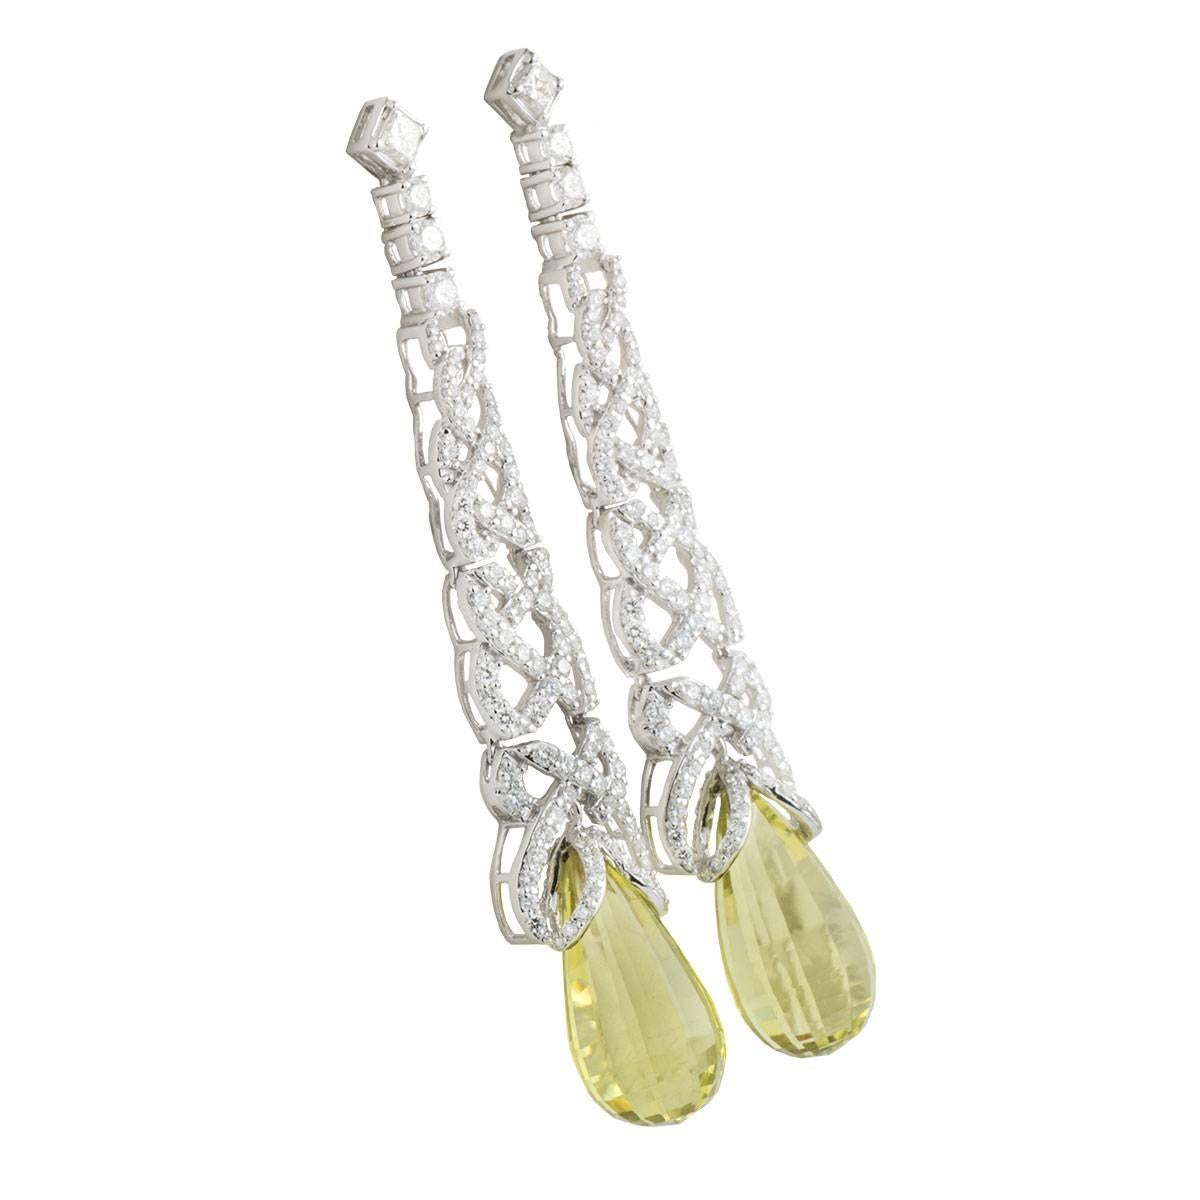 A sparkly 18k white gold diamond and lemon quartz drop earrings. The earrings comprise of an intricate open work design with 207 round brilliant cut diamonds in a pave set, with a total weight of 3.42ct, G-H colour and VS clarity. Each earring is